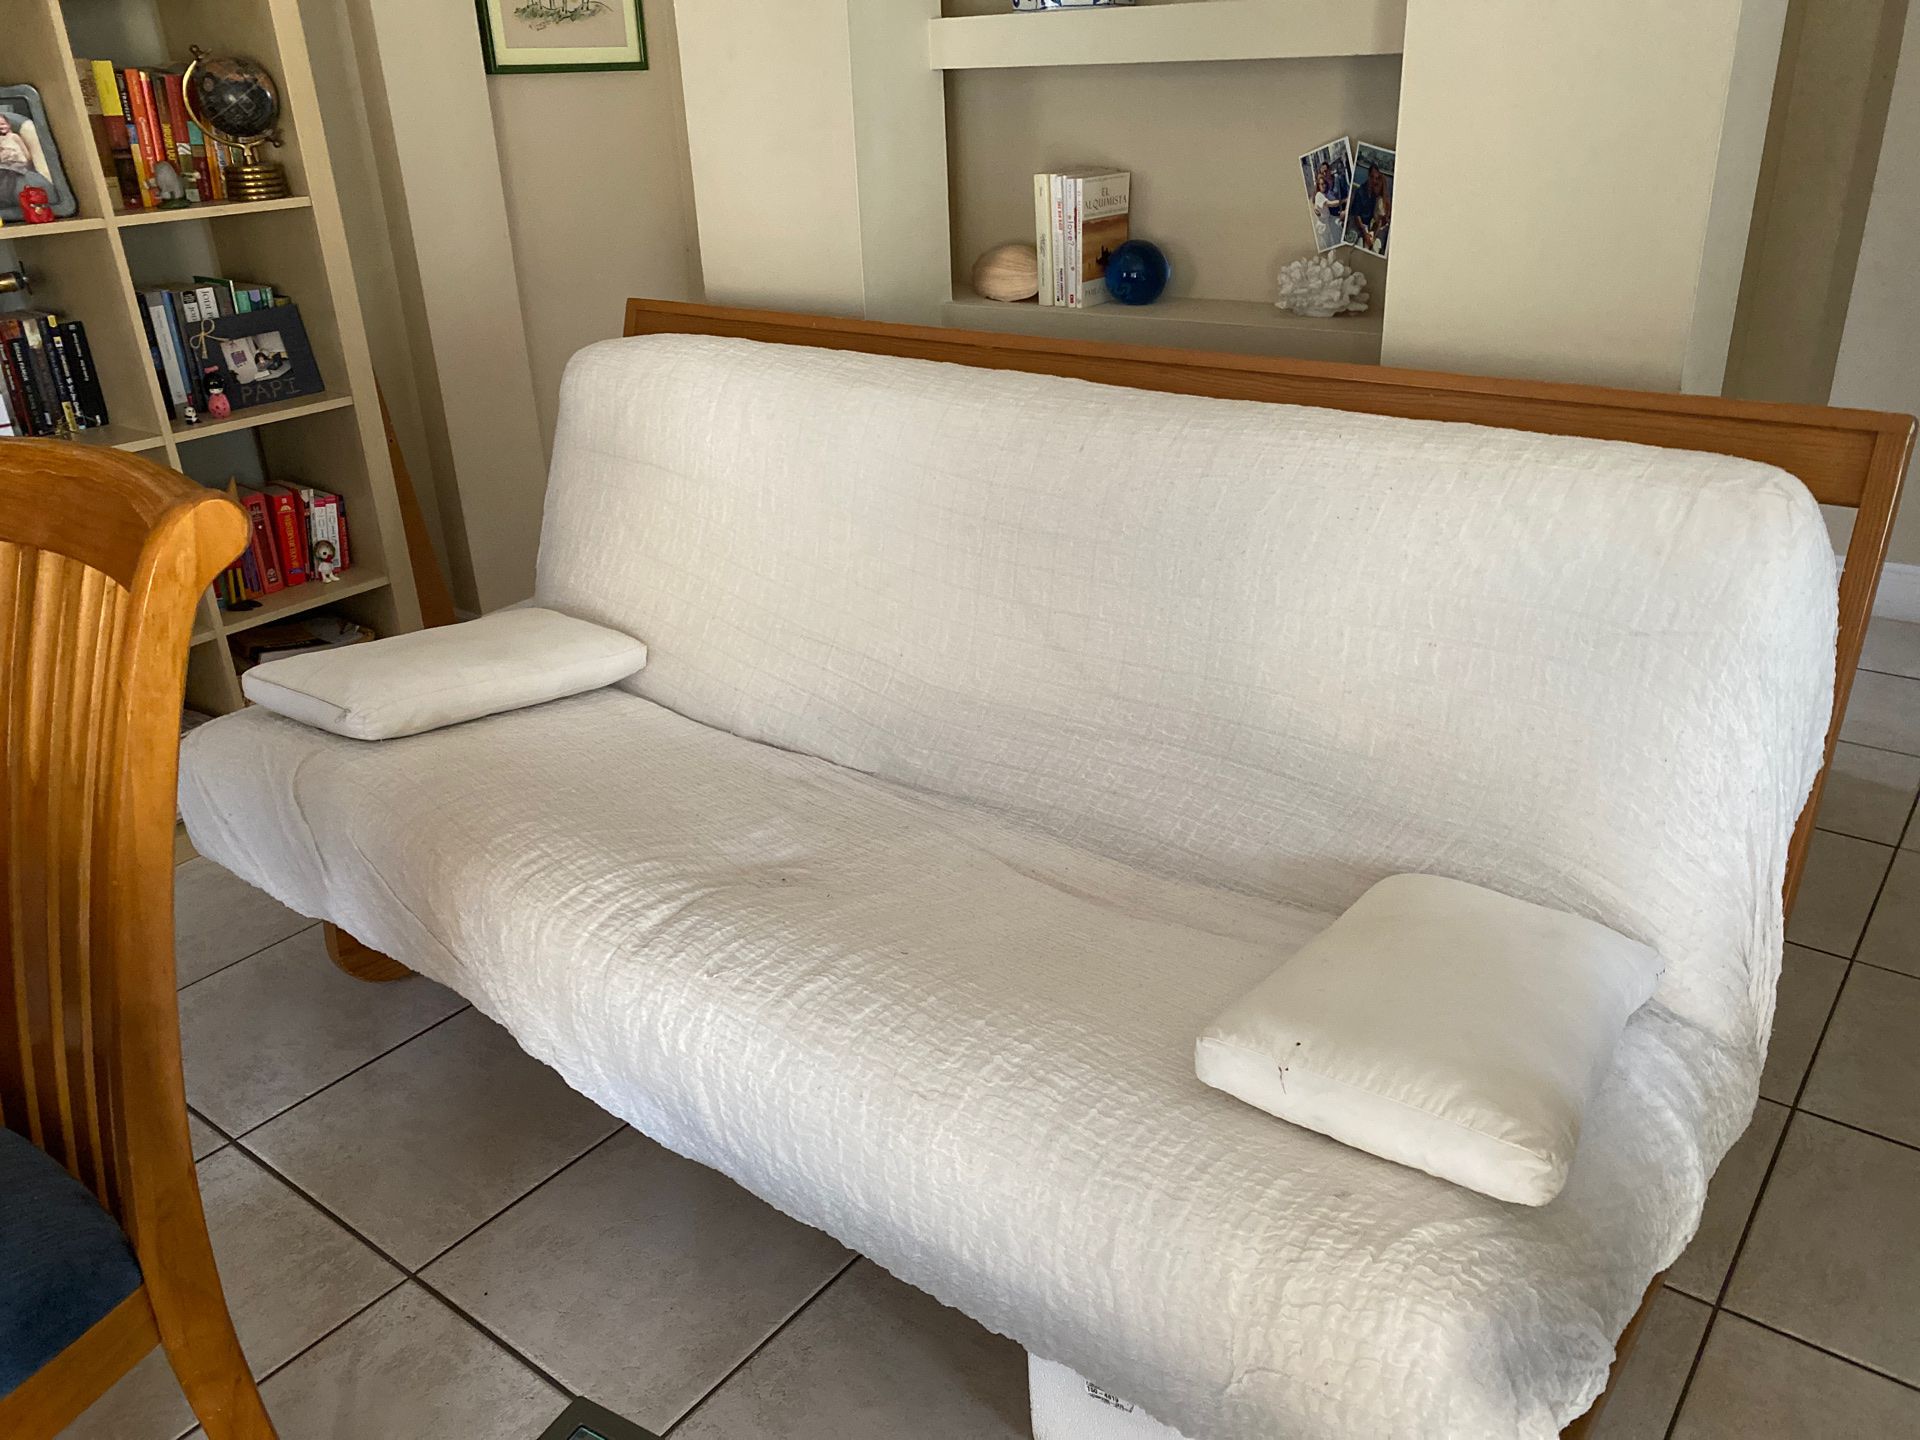 Free great condition Futon Come Pick Up now!